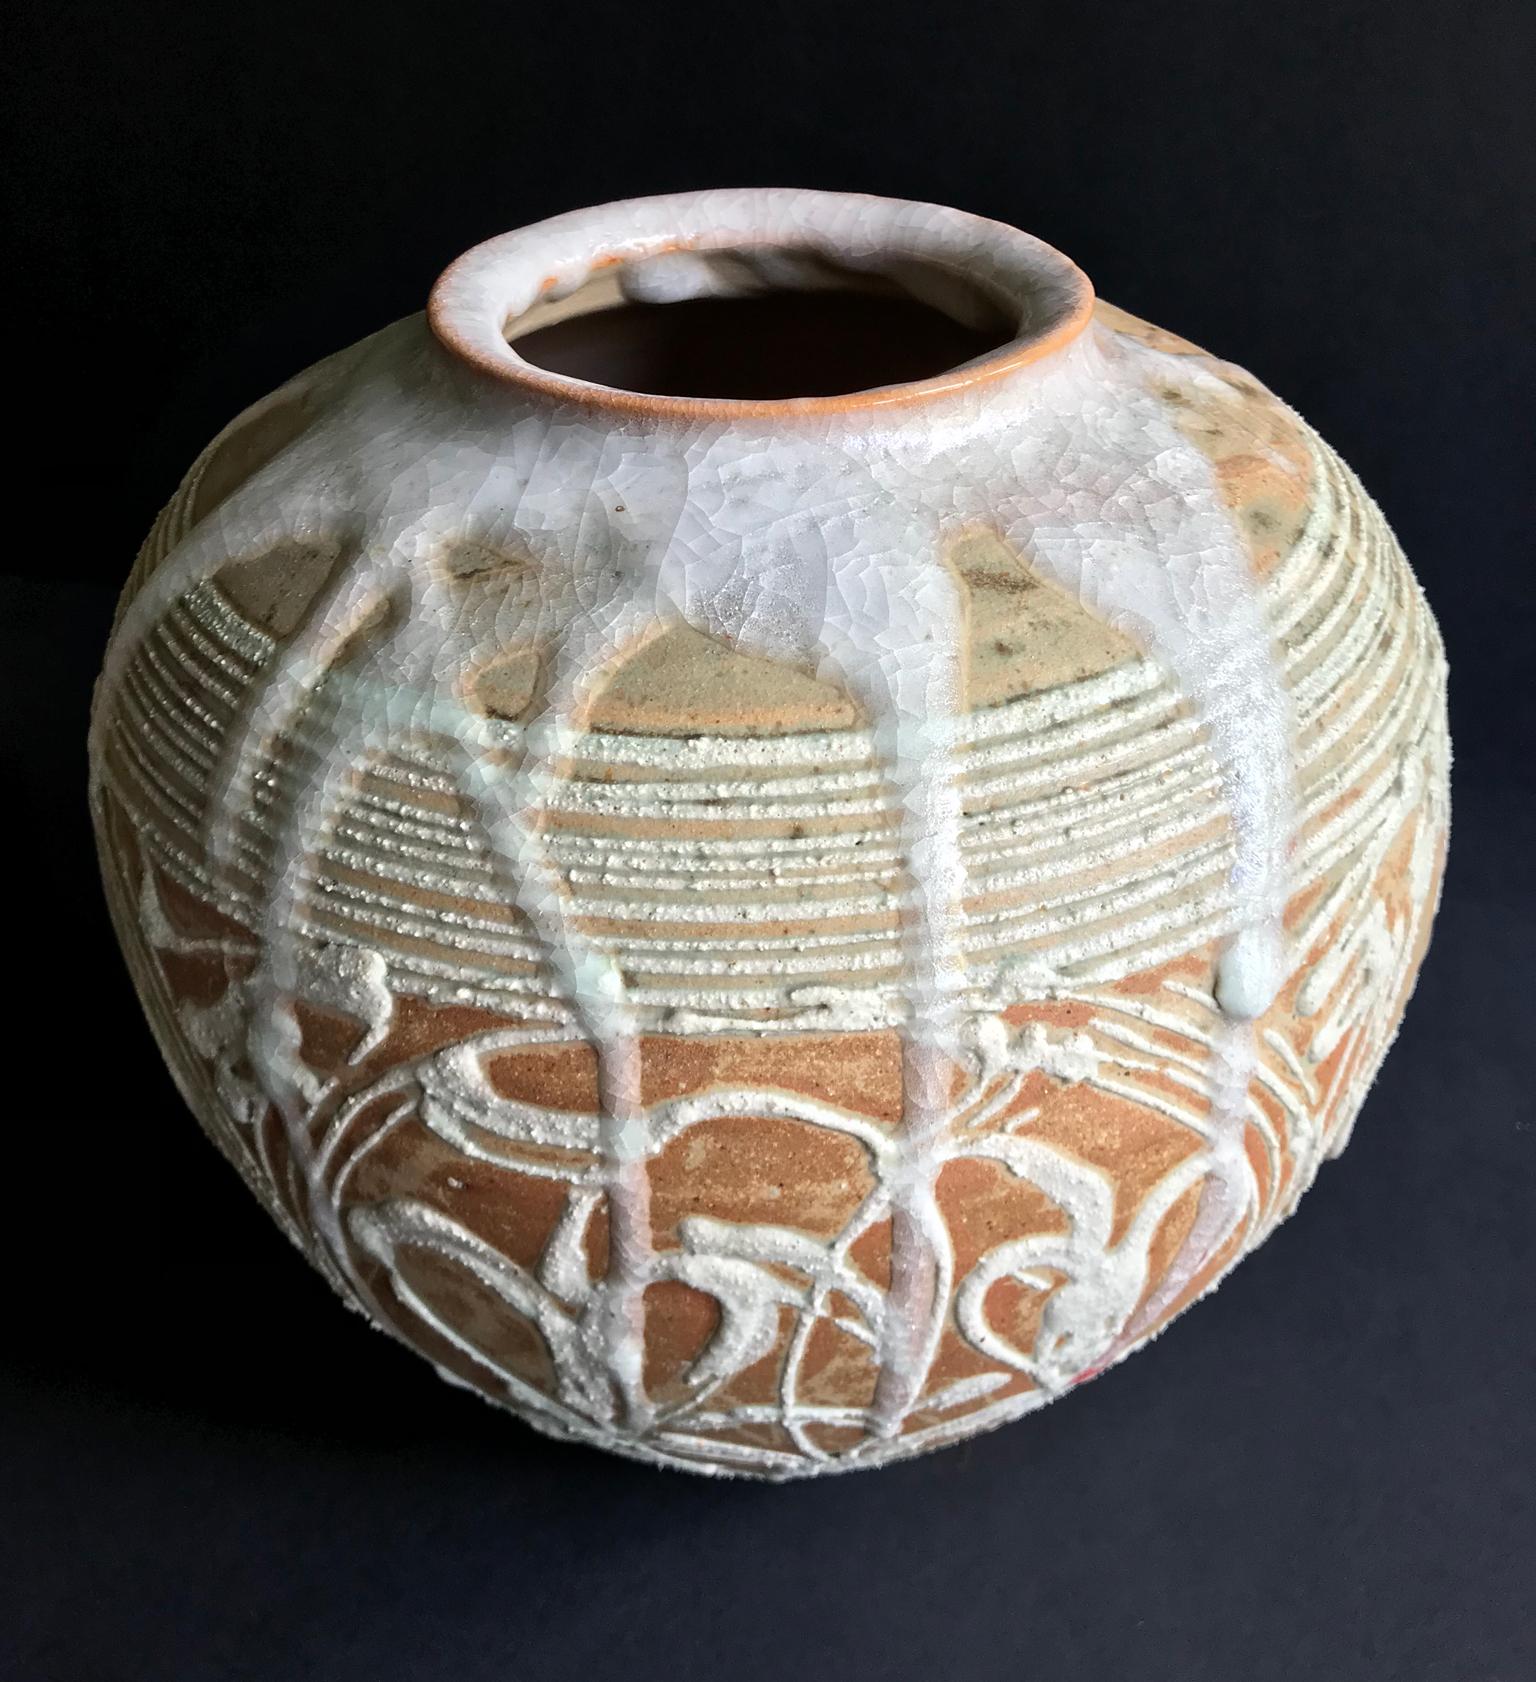 Japanese ceramic pot with a Kyoto label. Makers seal, unidentified, but possibly Mashiko.

Stoneware with dripping crackled glaze.

Original box.

circa 1970.